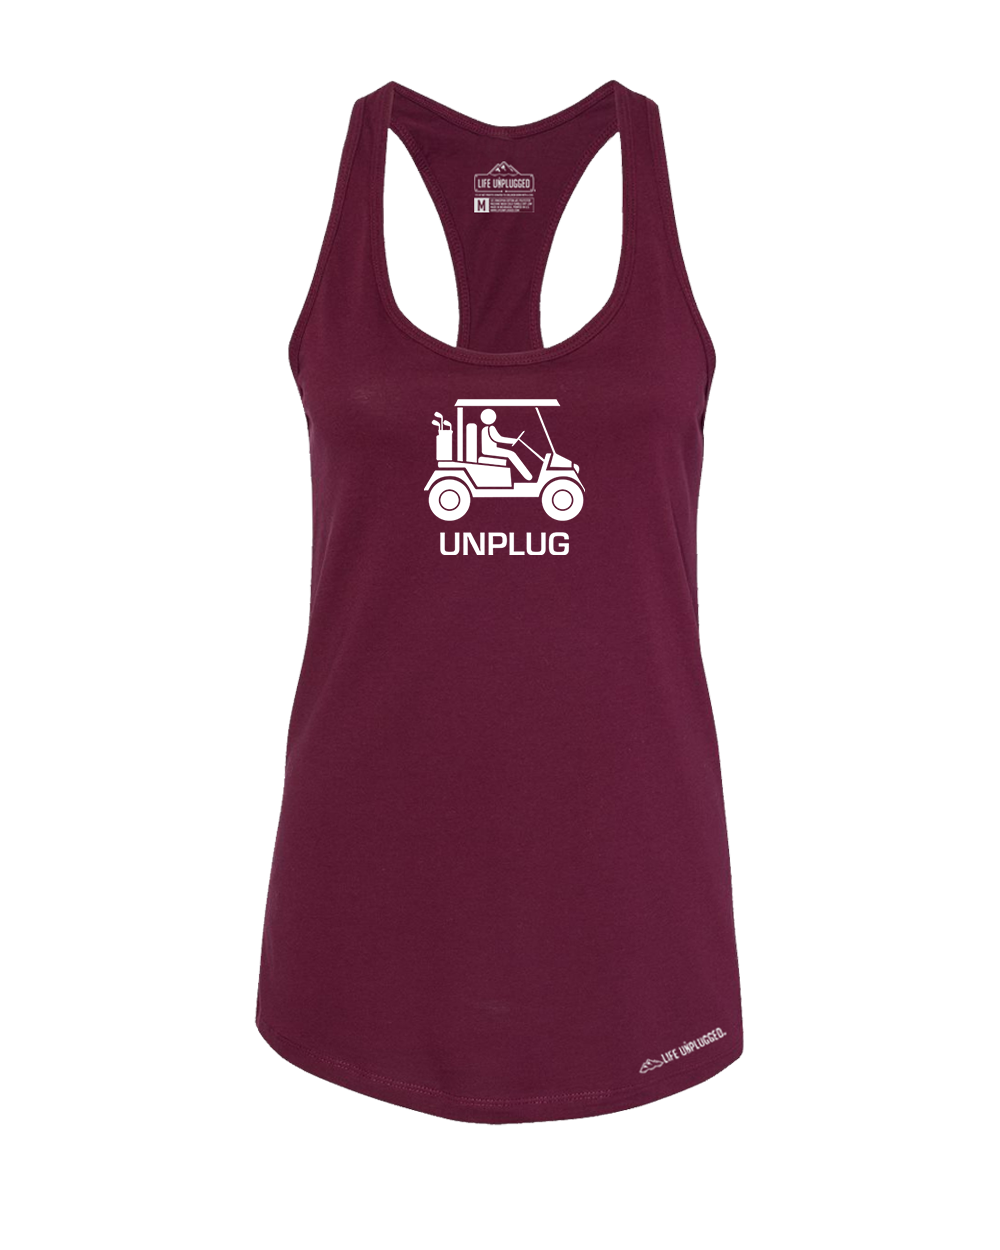 Golf Cart Premium Women's Relaxed Fit Racerback Tank Top - Life Unplugged